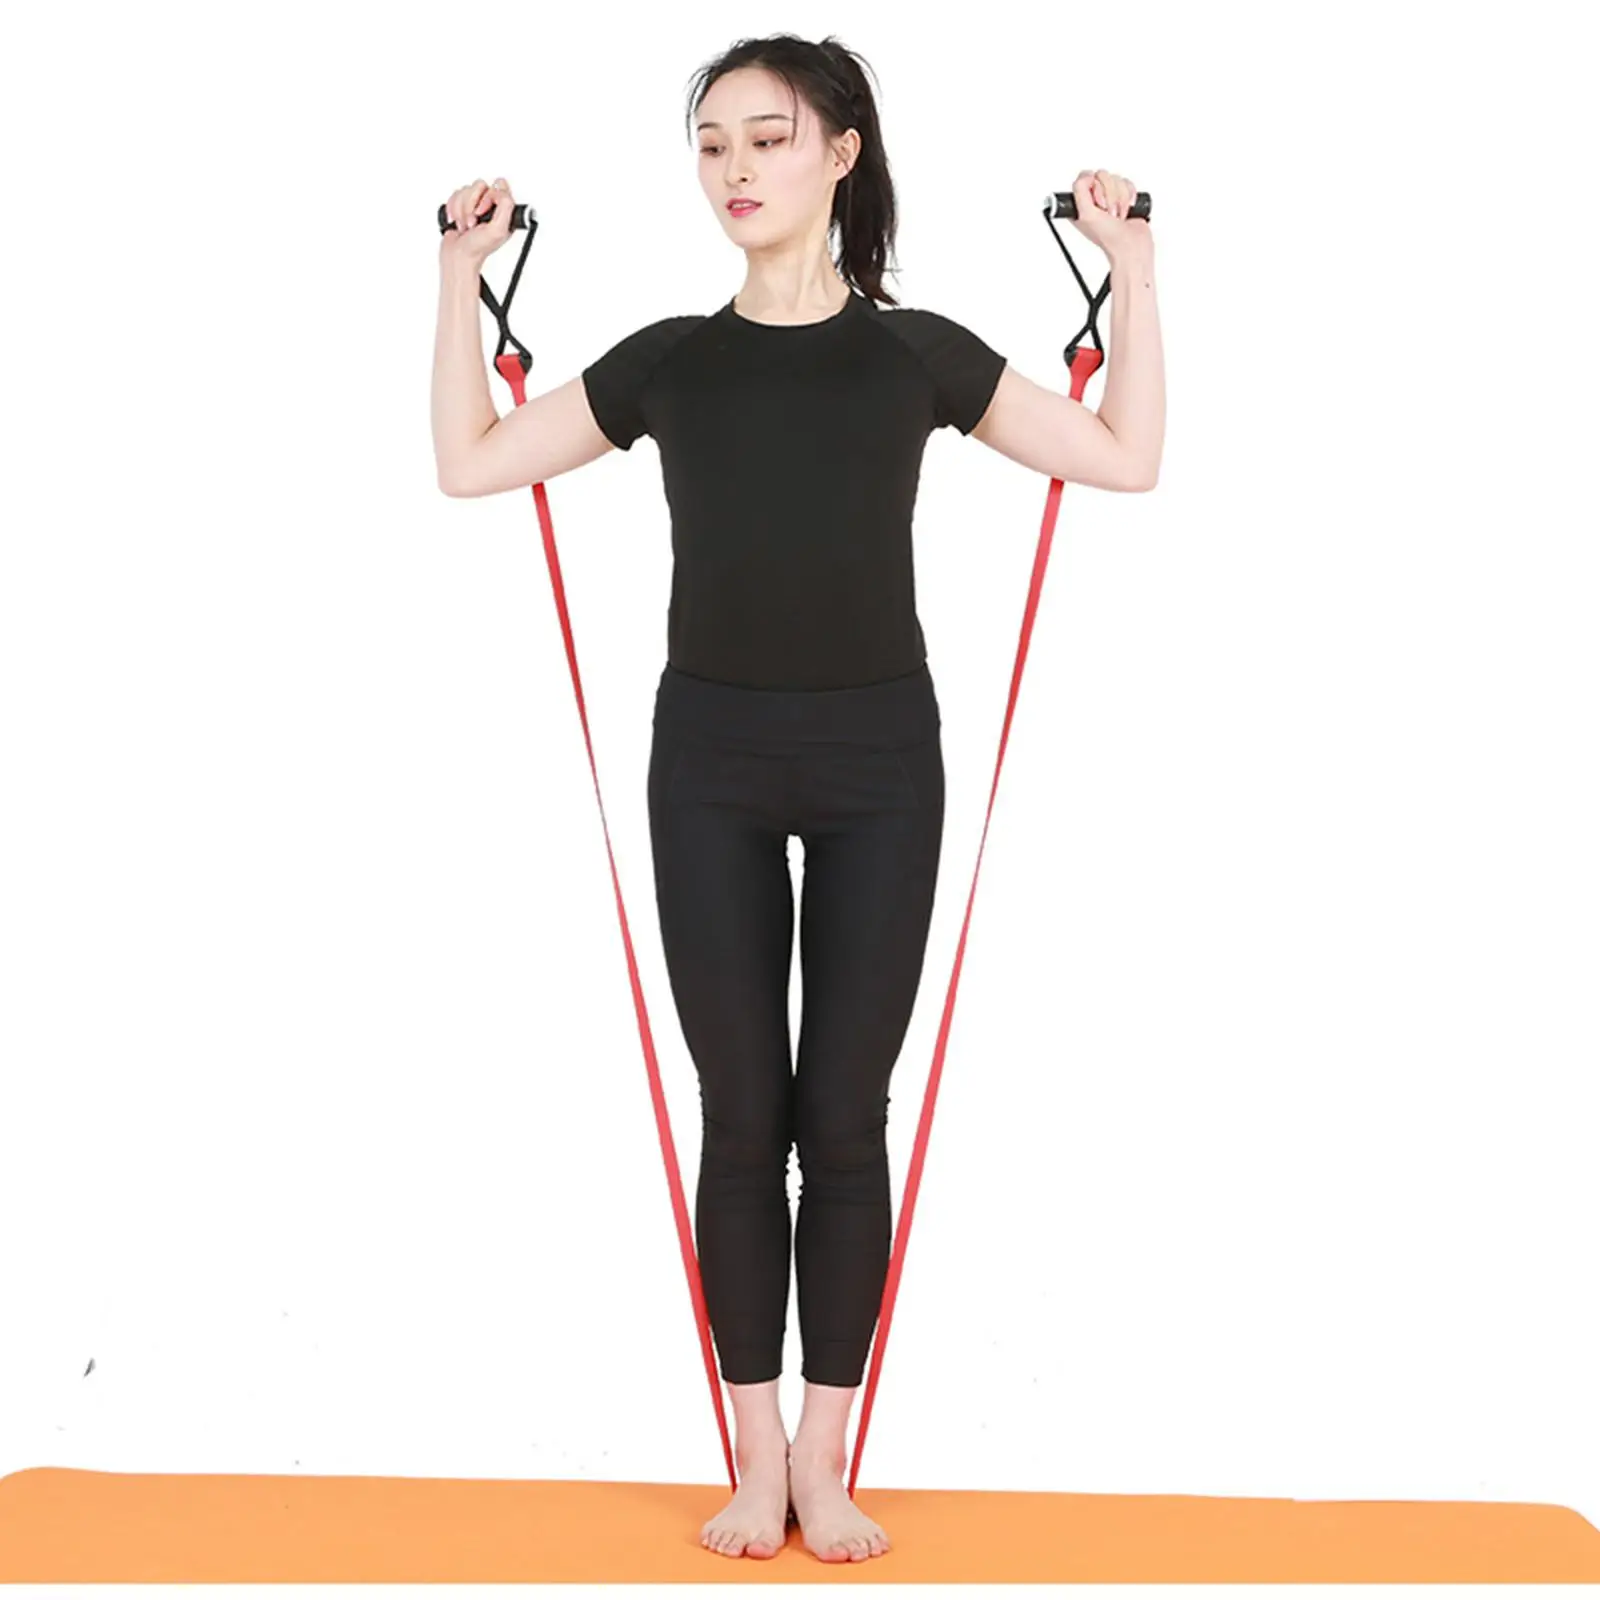 Exercise Resistance Bands with Handles Expander Home Yoga Workout Pull Rope